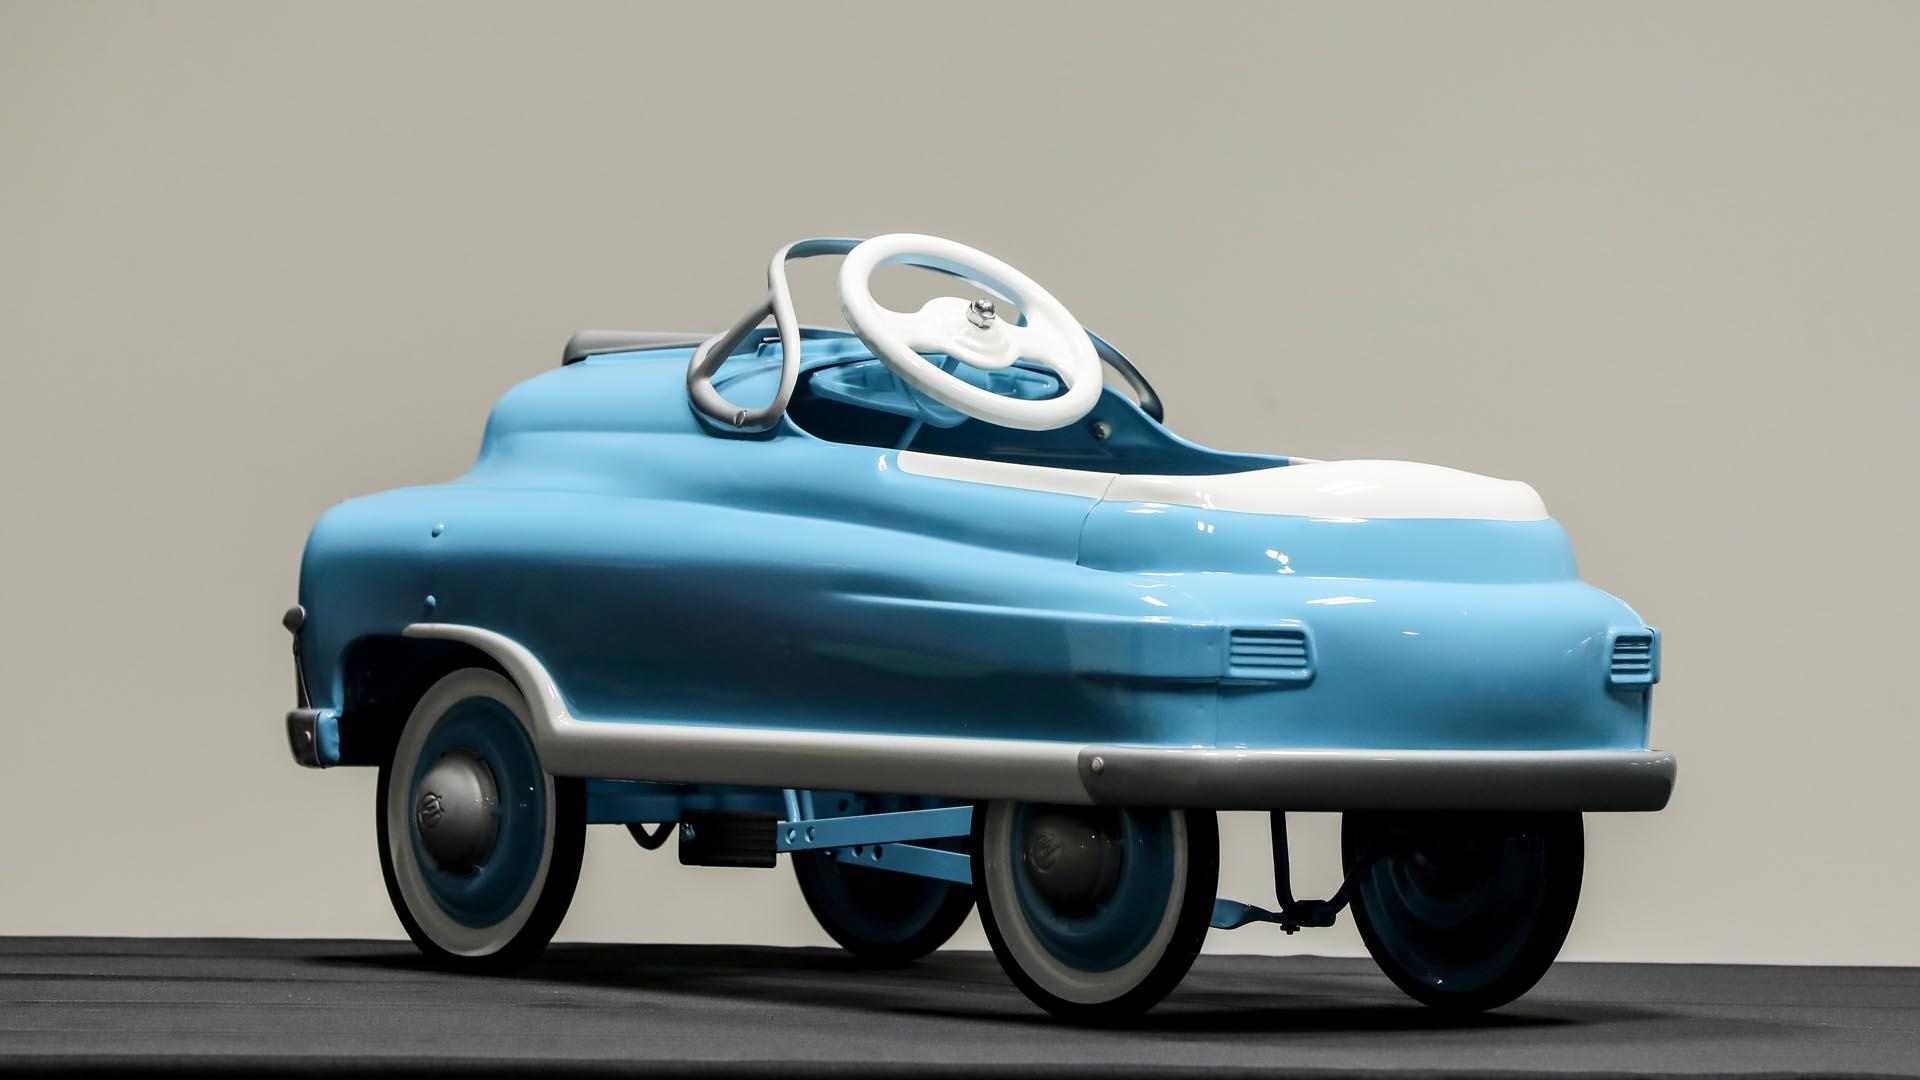 Child's "Comet" Pedal Car by Murray